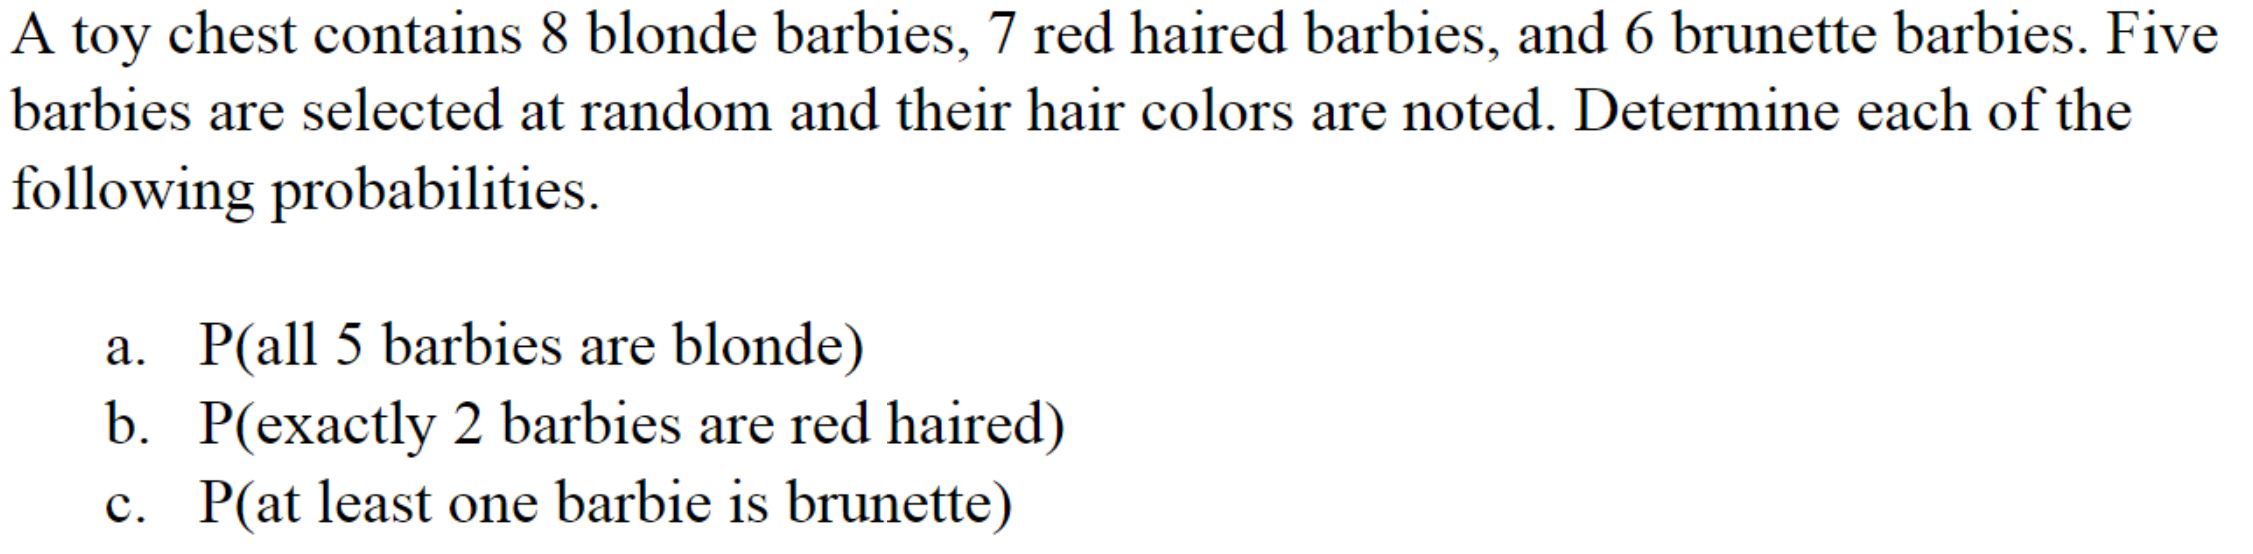 A toy chest contains 8 blonde barbies, 7 red haired barbies, and 6 brunette barbies. Five
barbies are selected at random and their hair colors are noted. Determine each of the
following probabilities.
a. P(all 5 barbies are blonde)
b. P(exactly 2 barbies are red haired)
c. P(at least one barbie is brunette)
